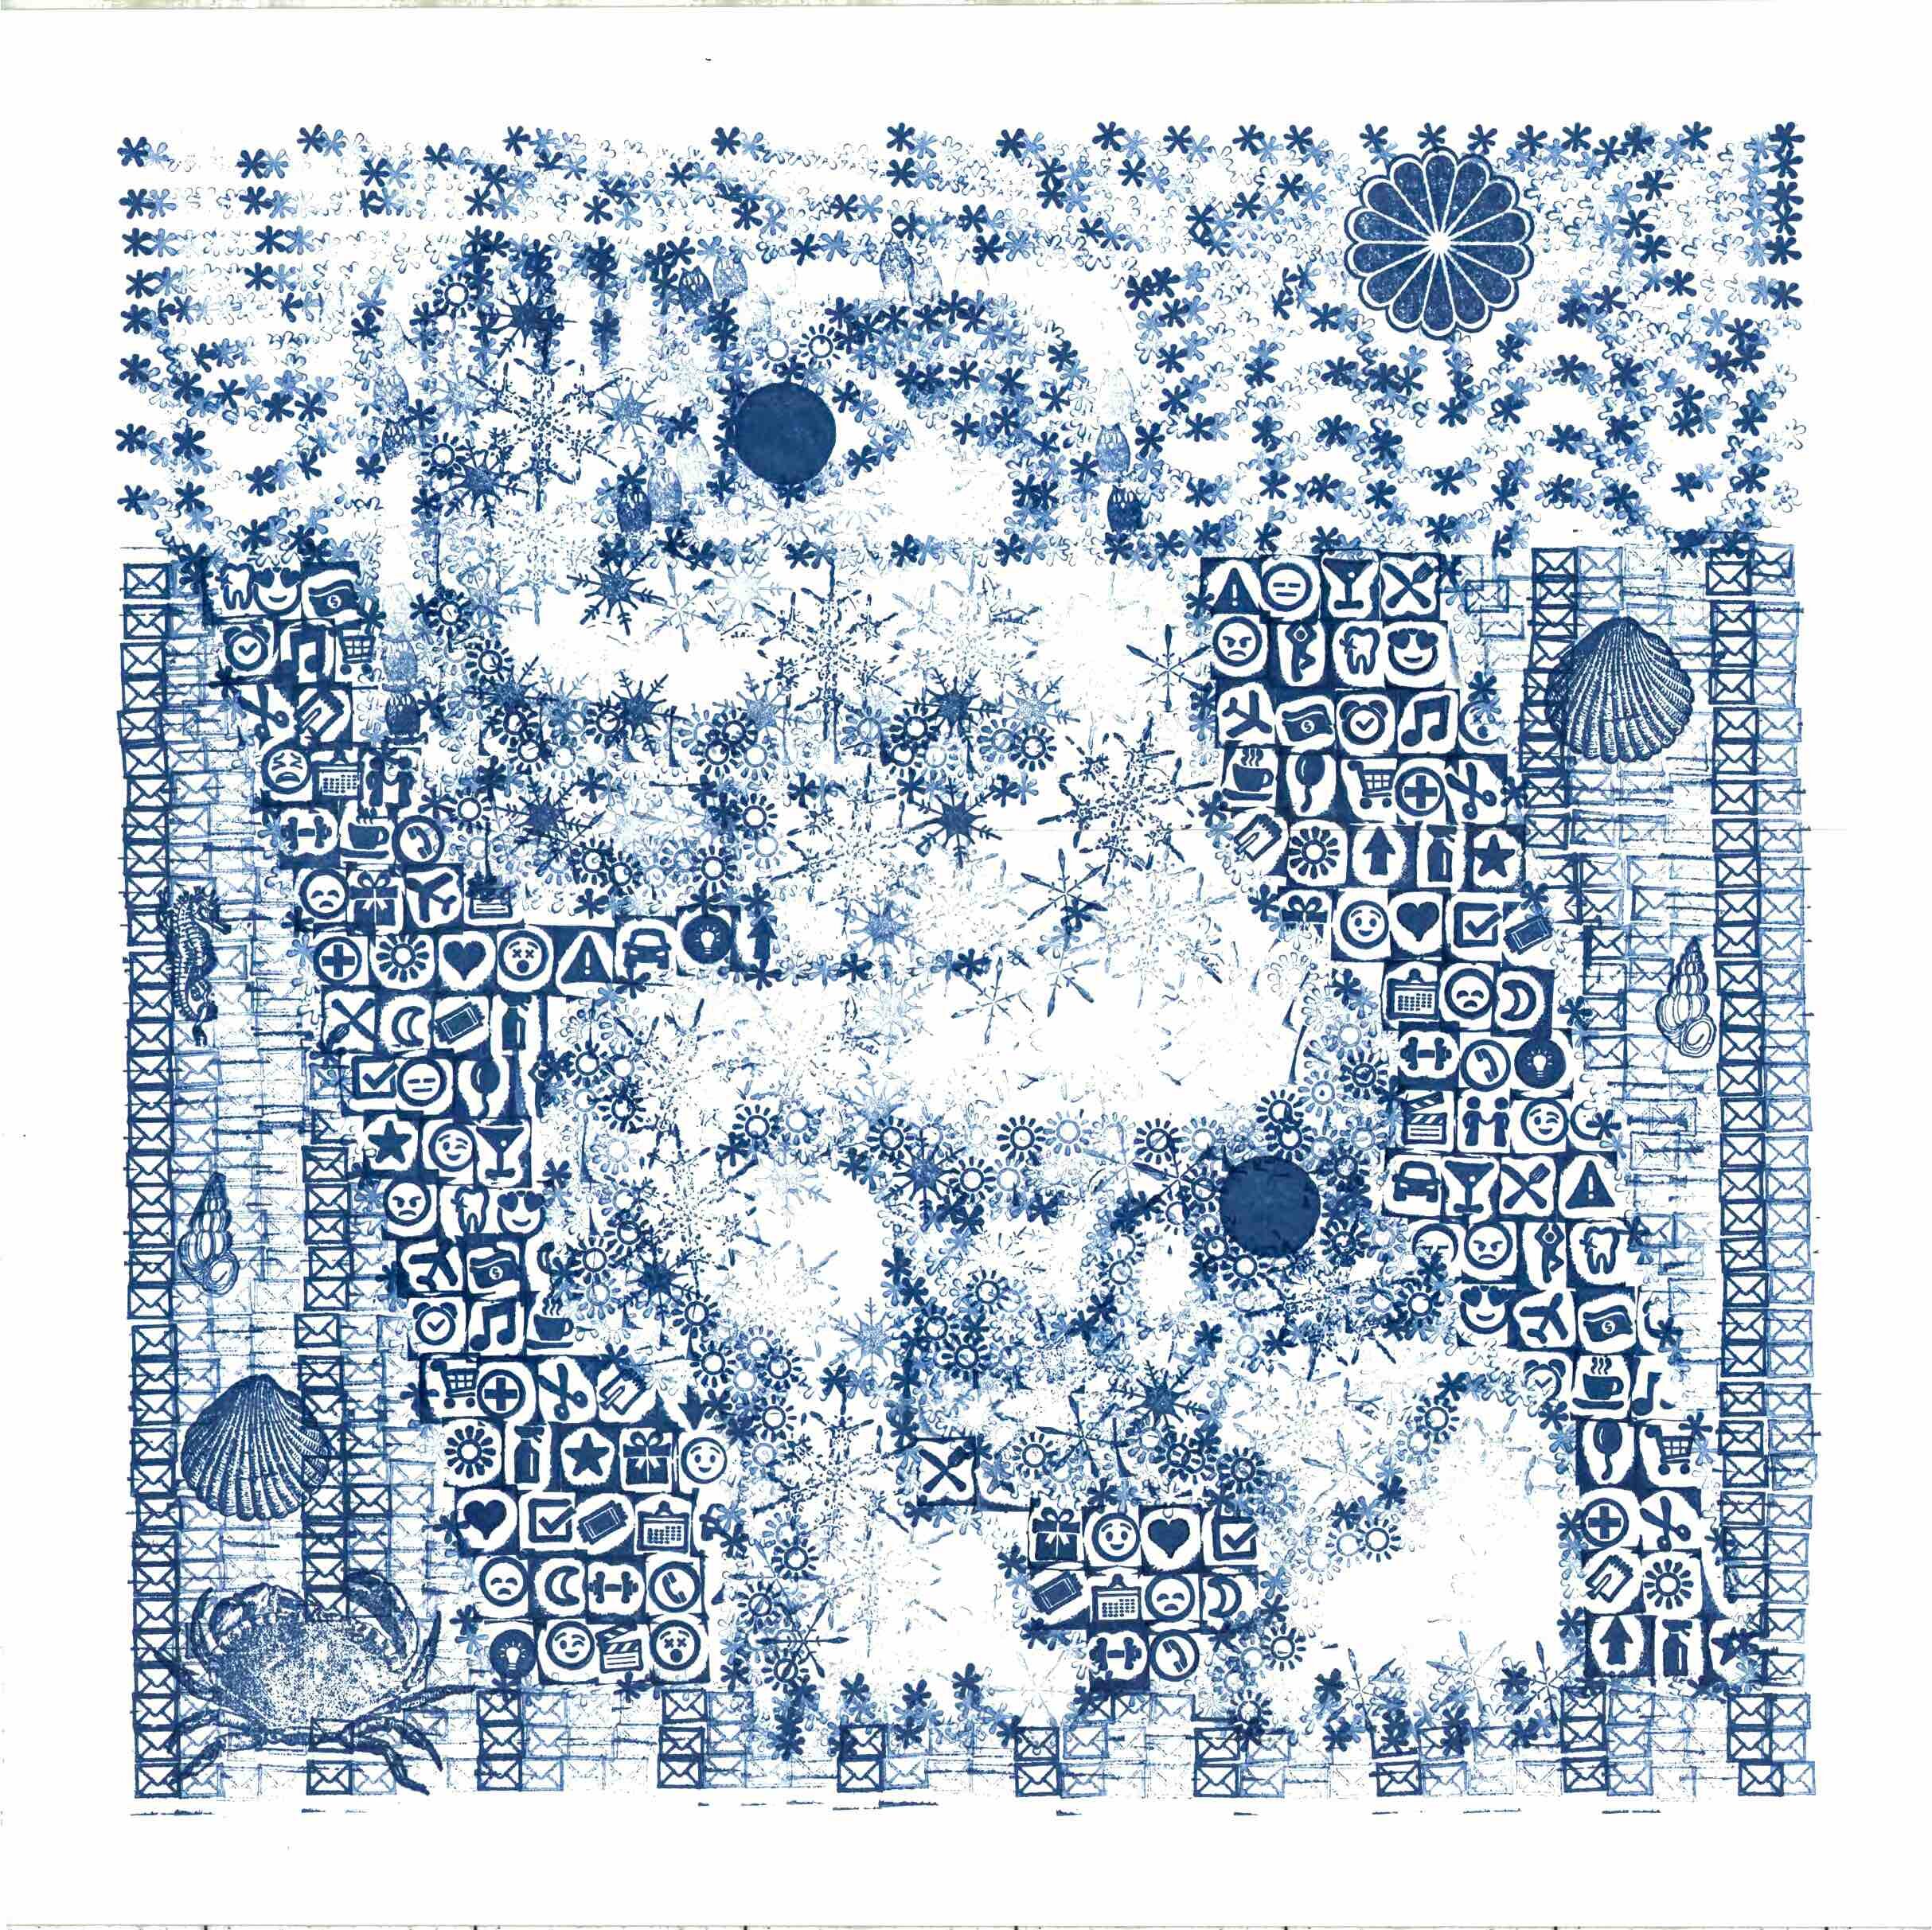   DOMINIC TERLIZZI    BEACH BLANKET , 2021  Ink on Paper  16 x 16 inches   info@goodnakedgallery.com    